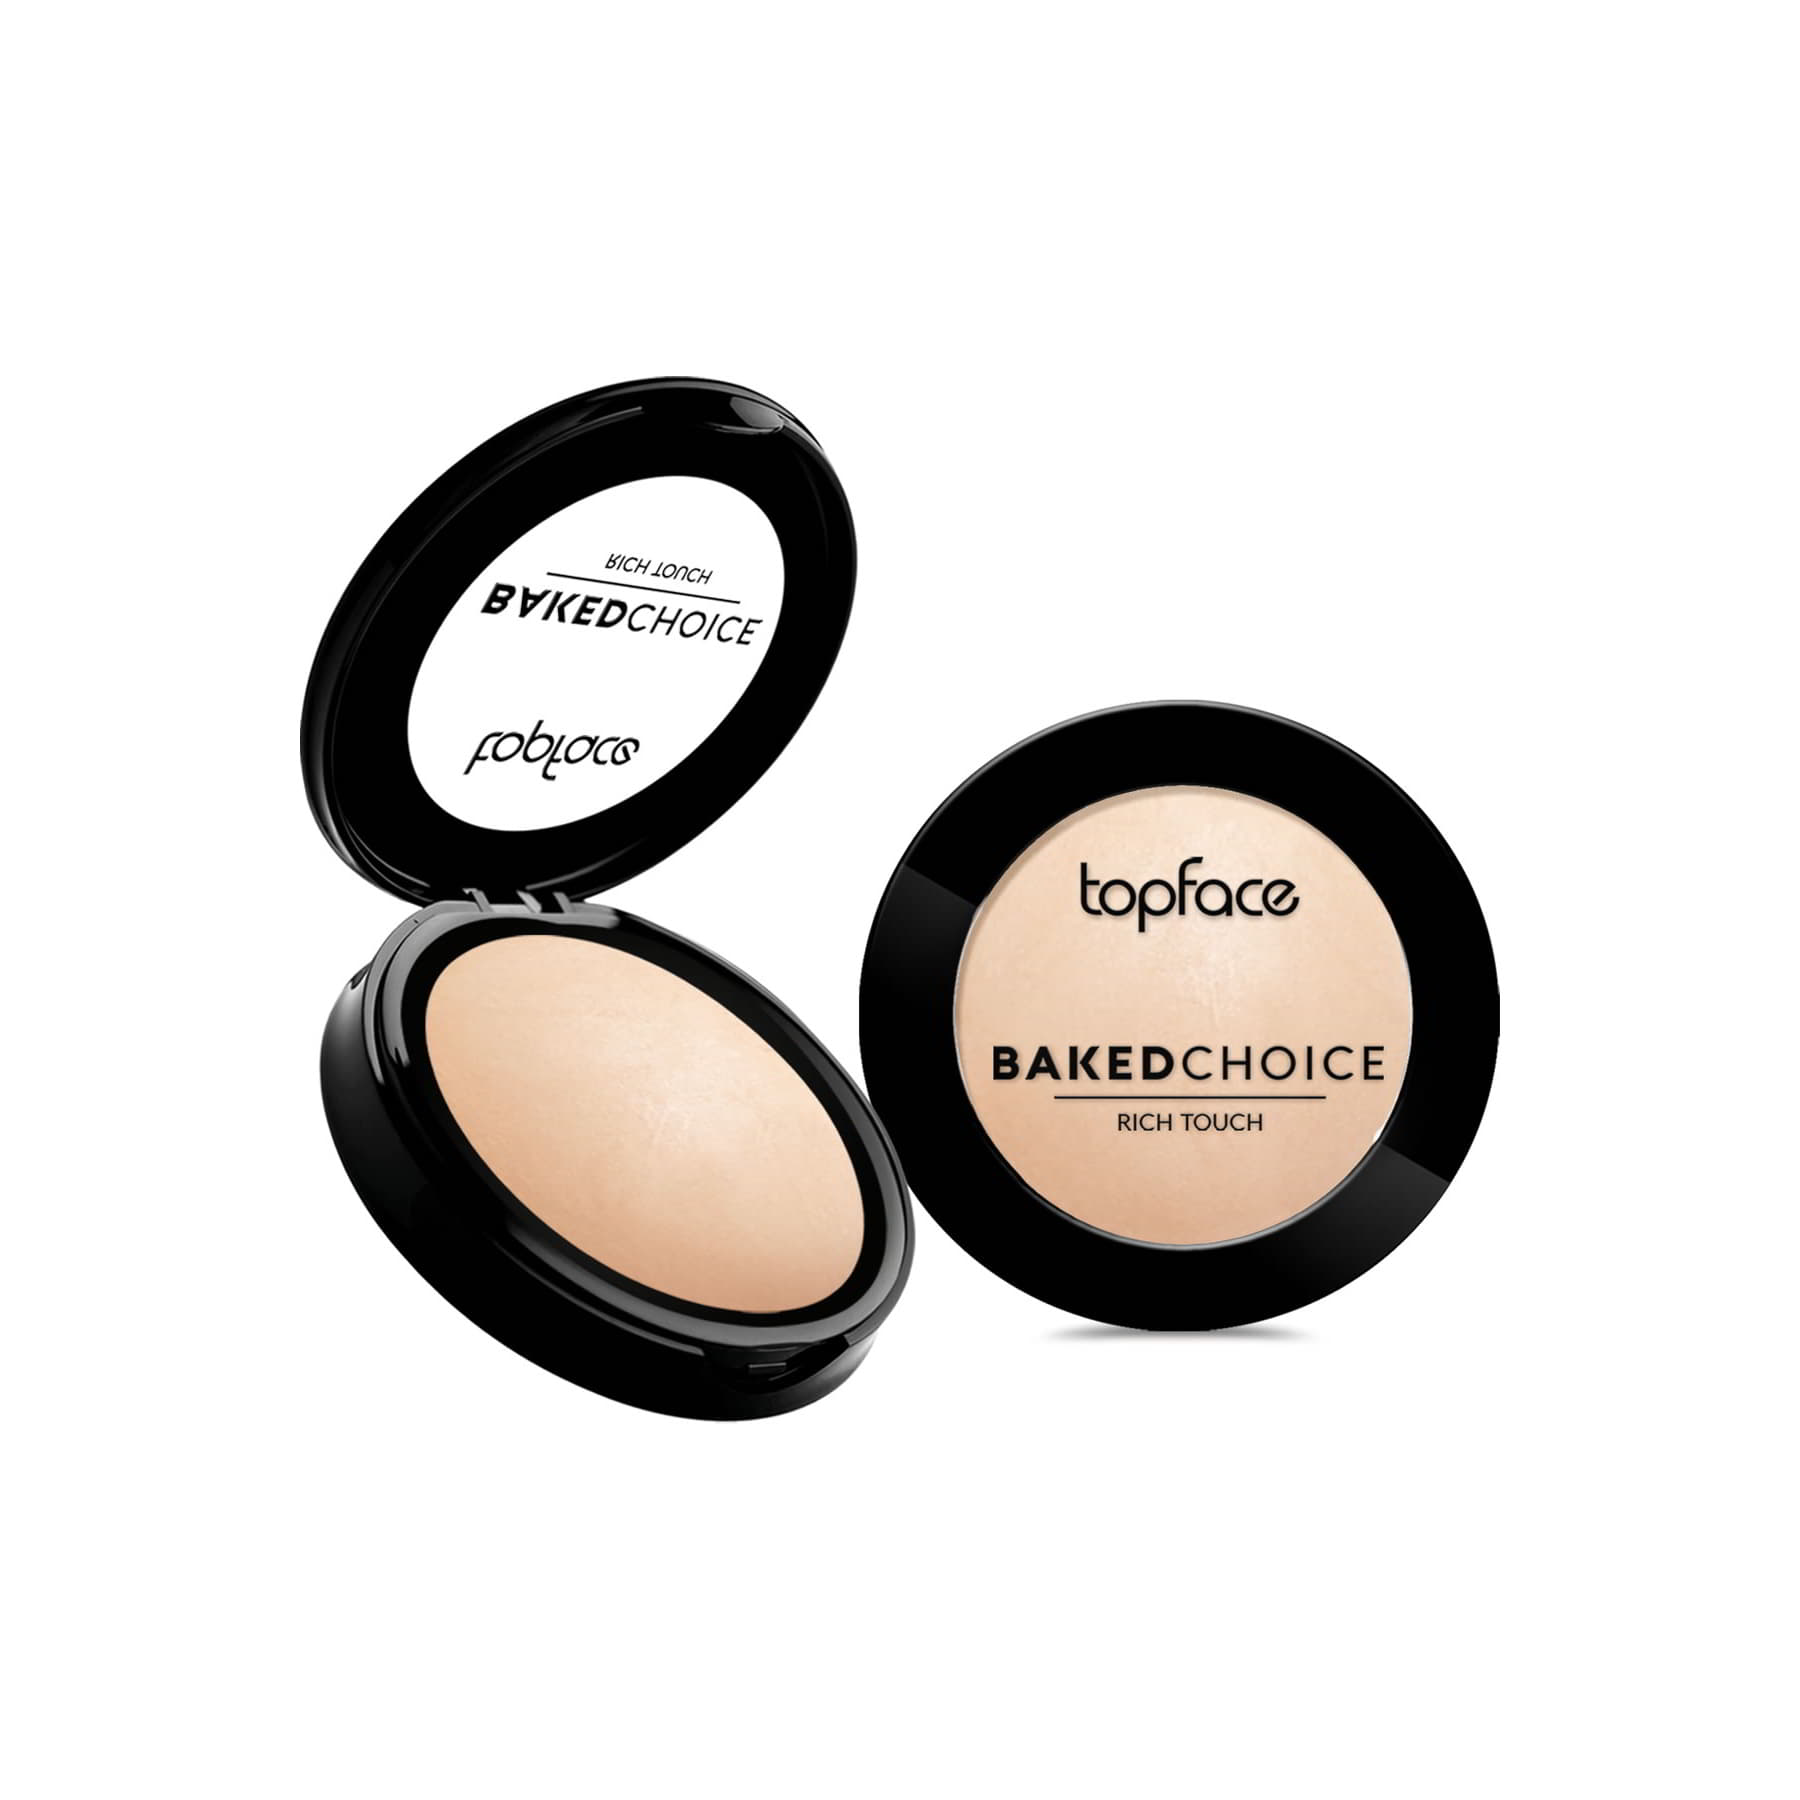 Baked Choice Rich Touch Powder